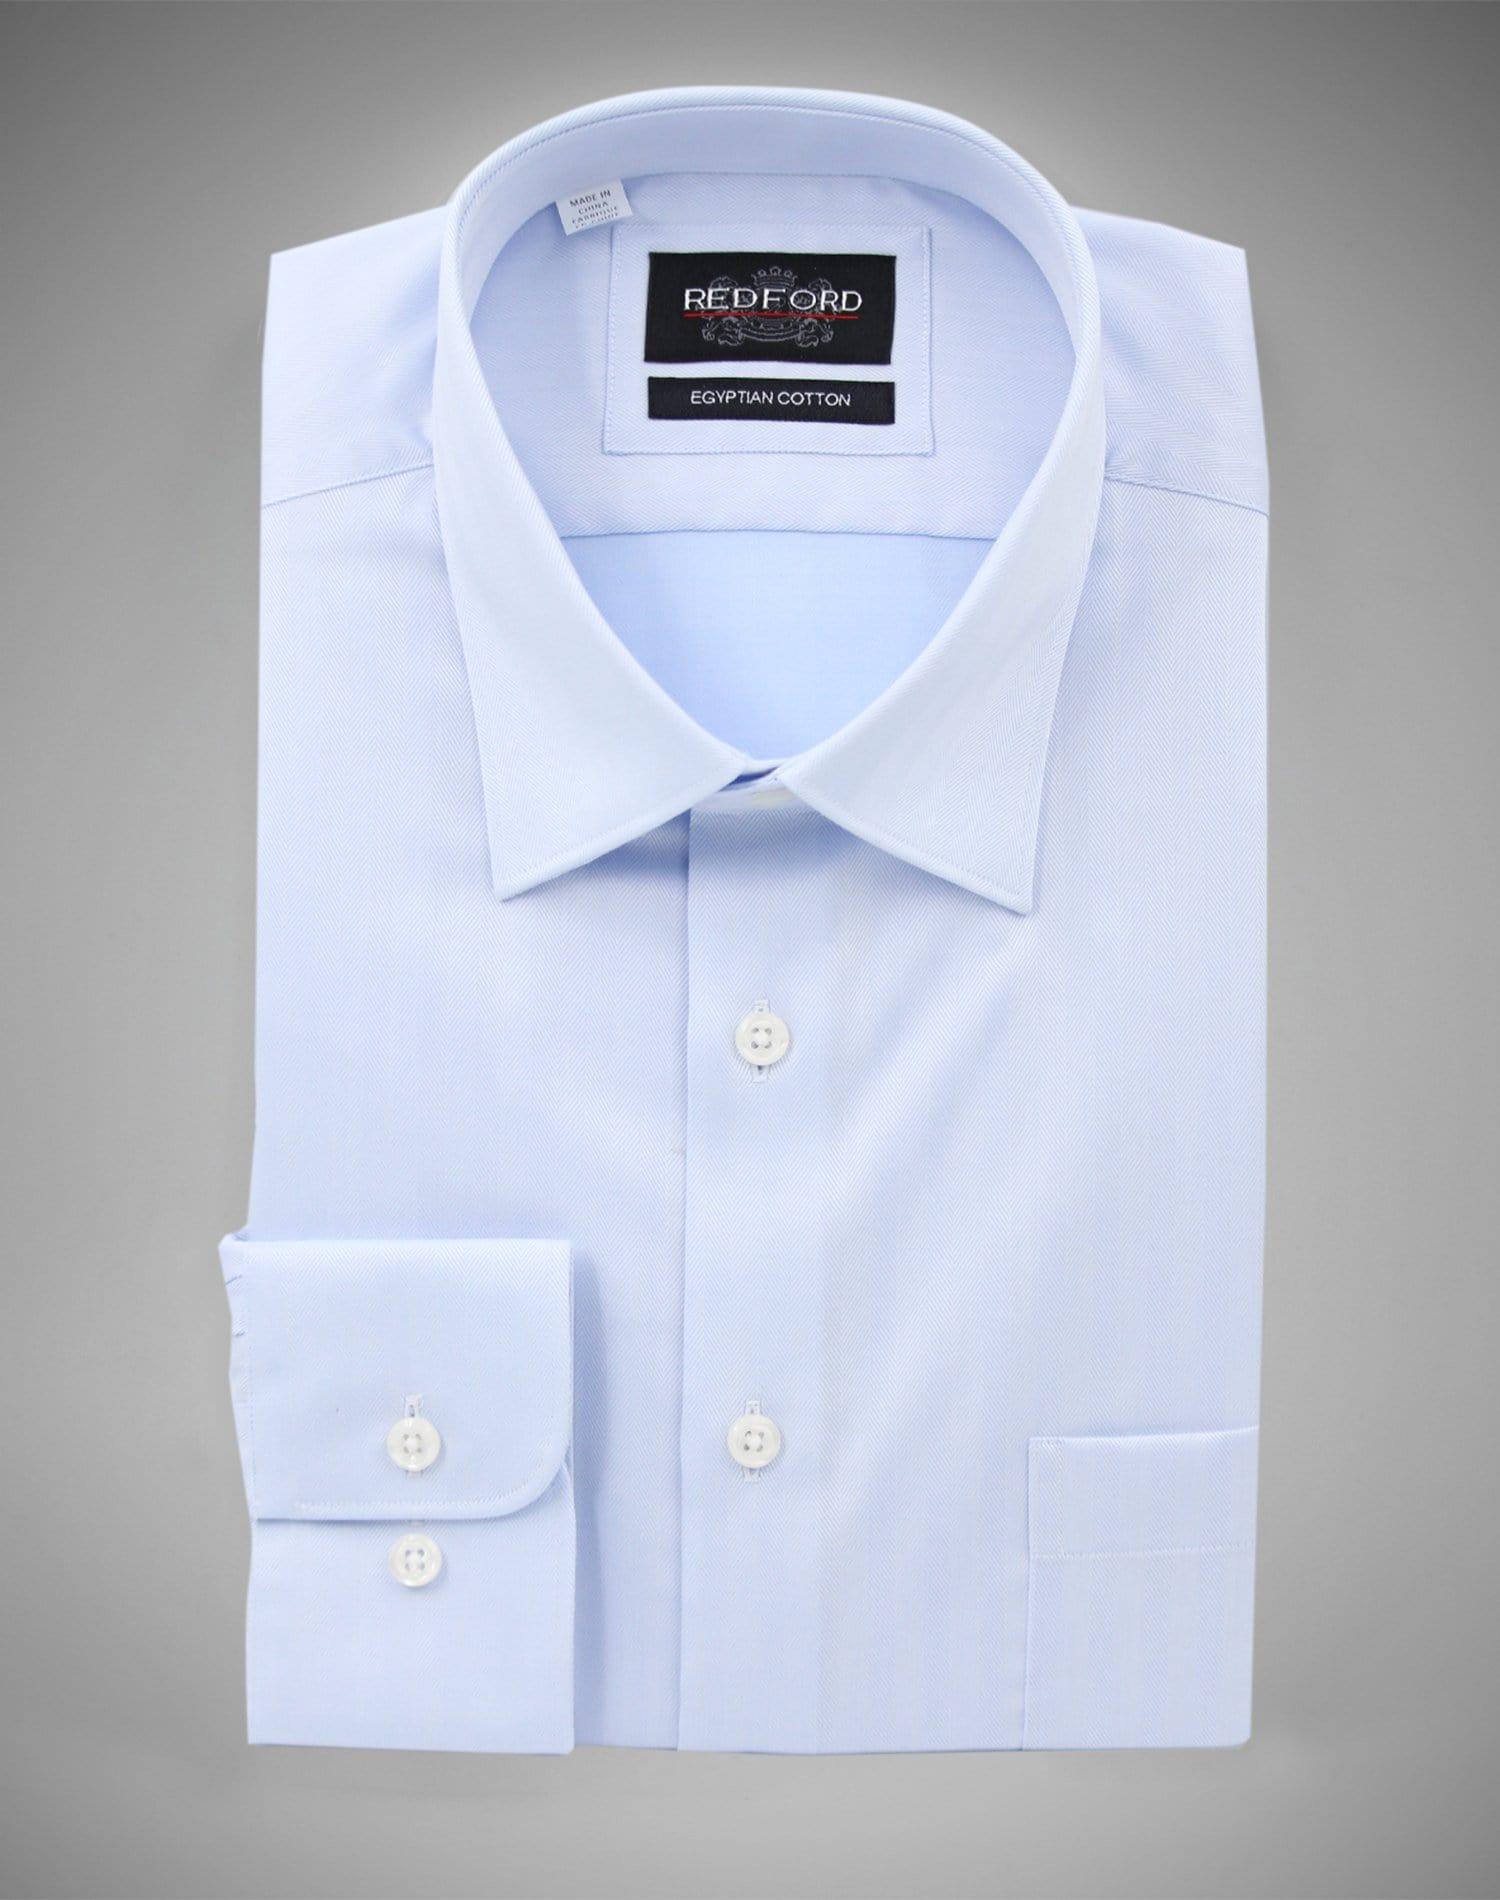 Non-Iron Solid Light Blue Shirt - Just White Shirts